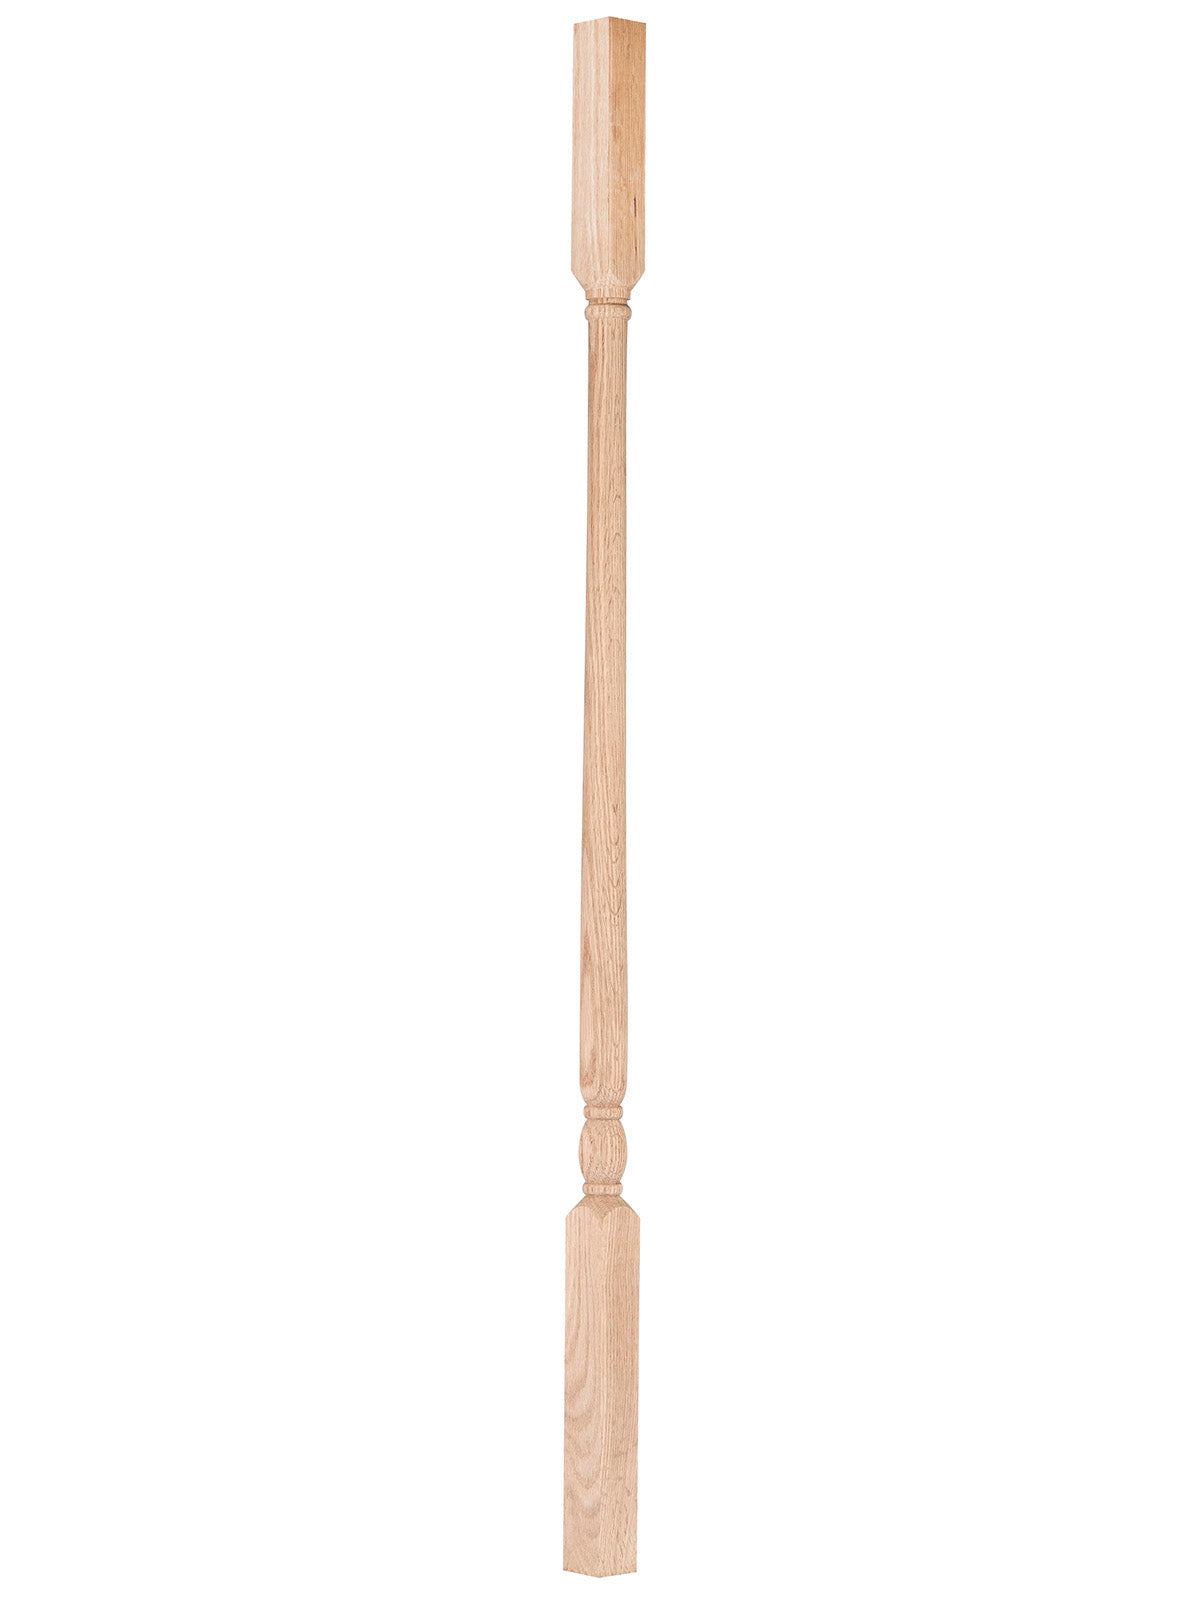 Baluster Colonial 5141 (Square Top)